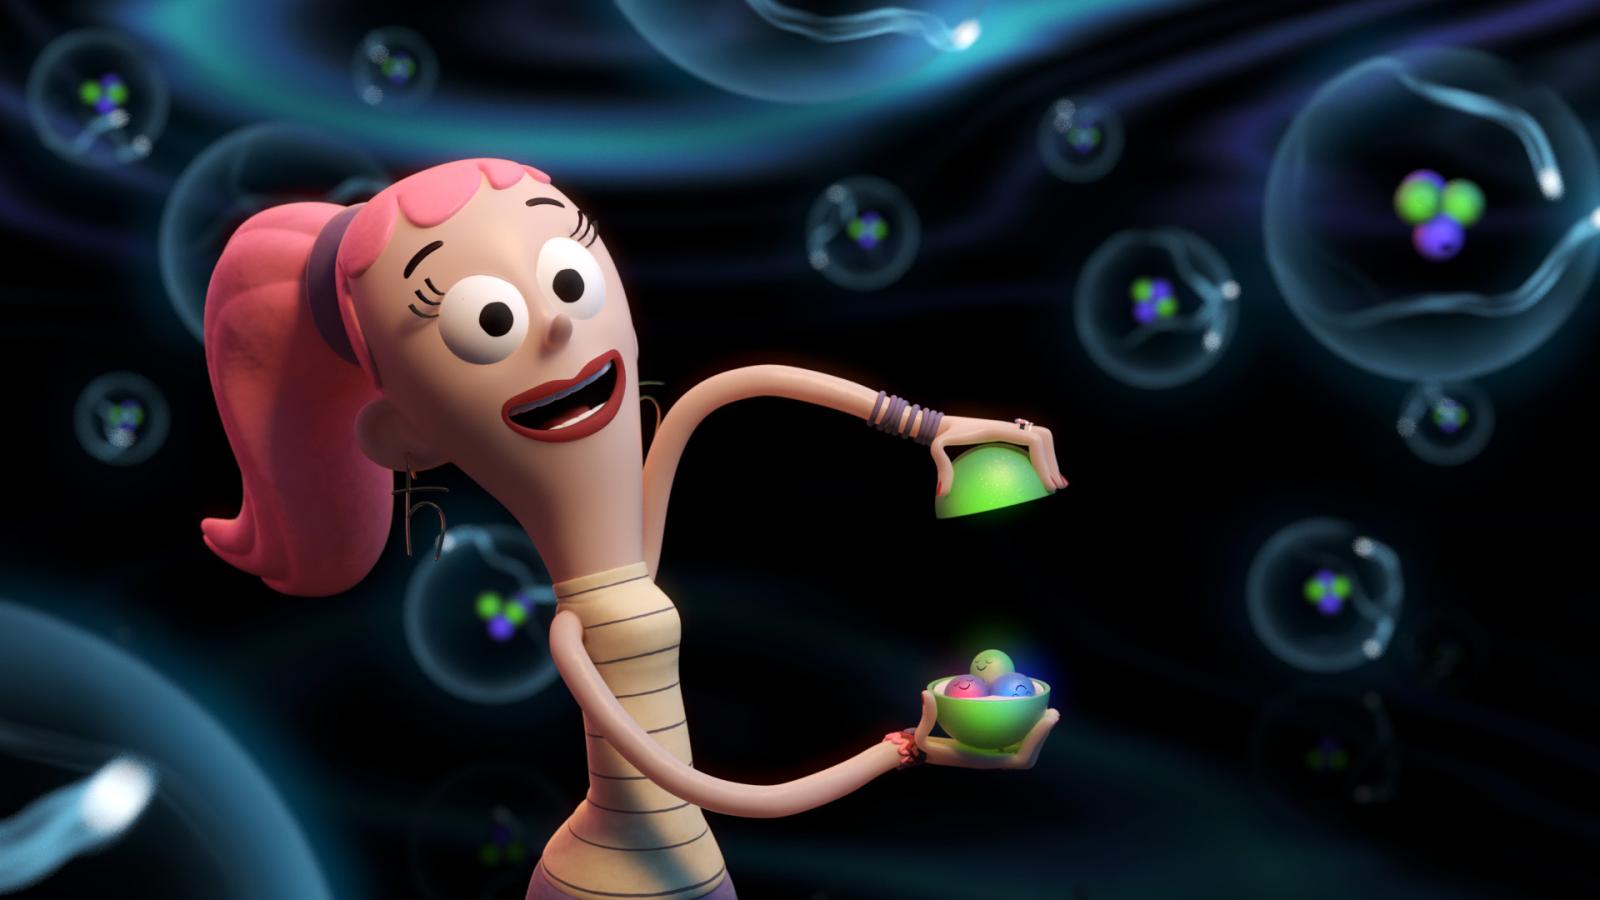 Still from an animated Quantum Kate video showing a girl with pink hair surrounded by particles